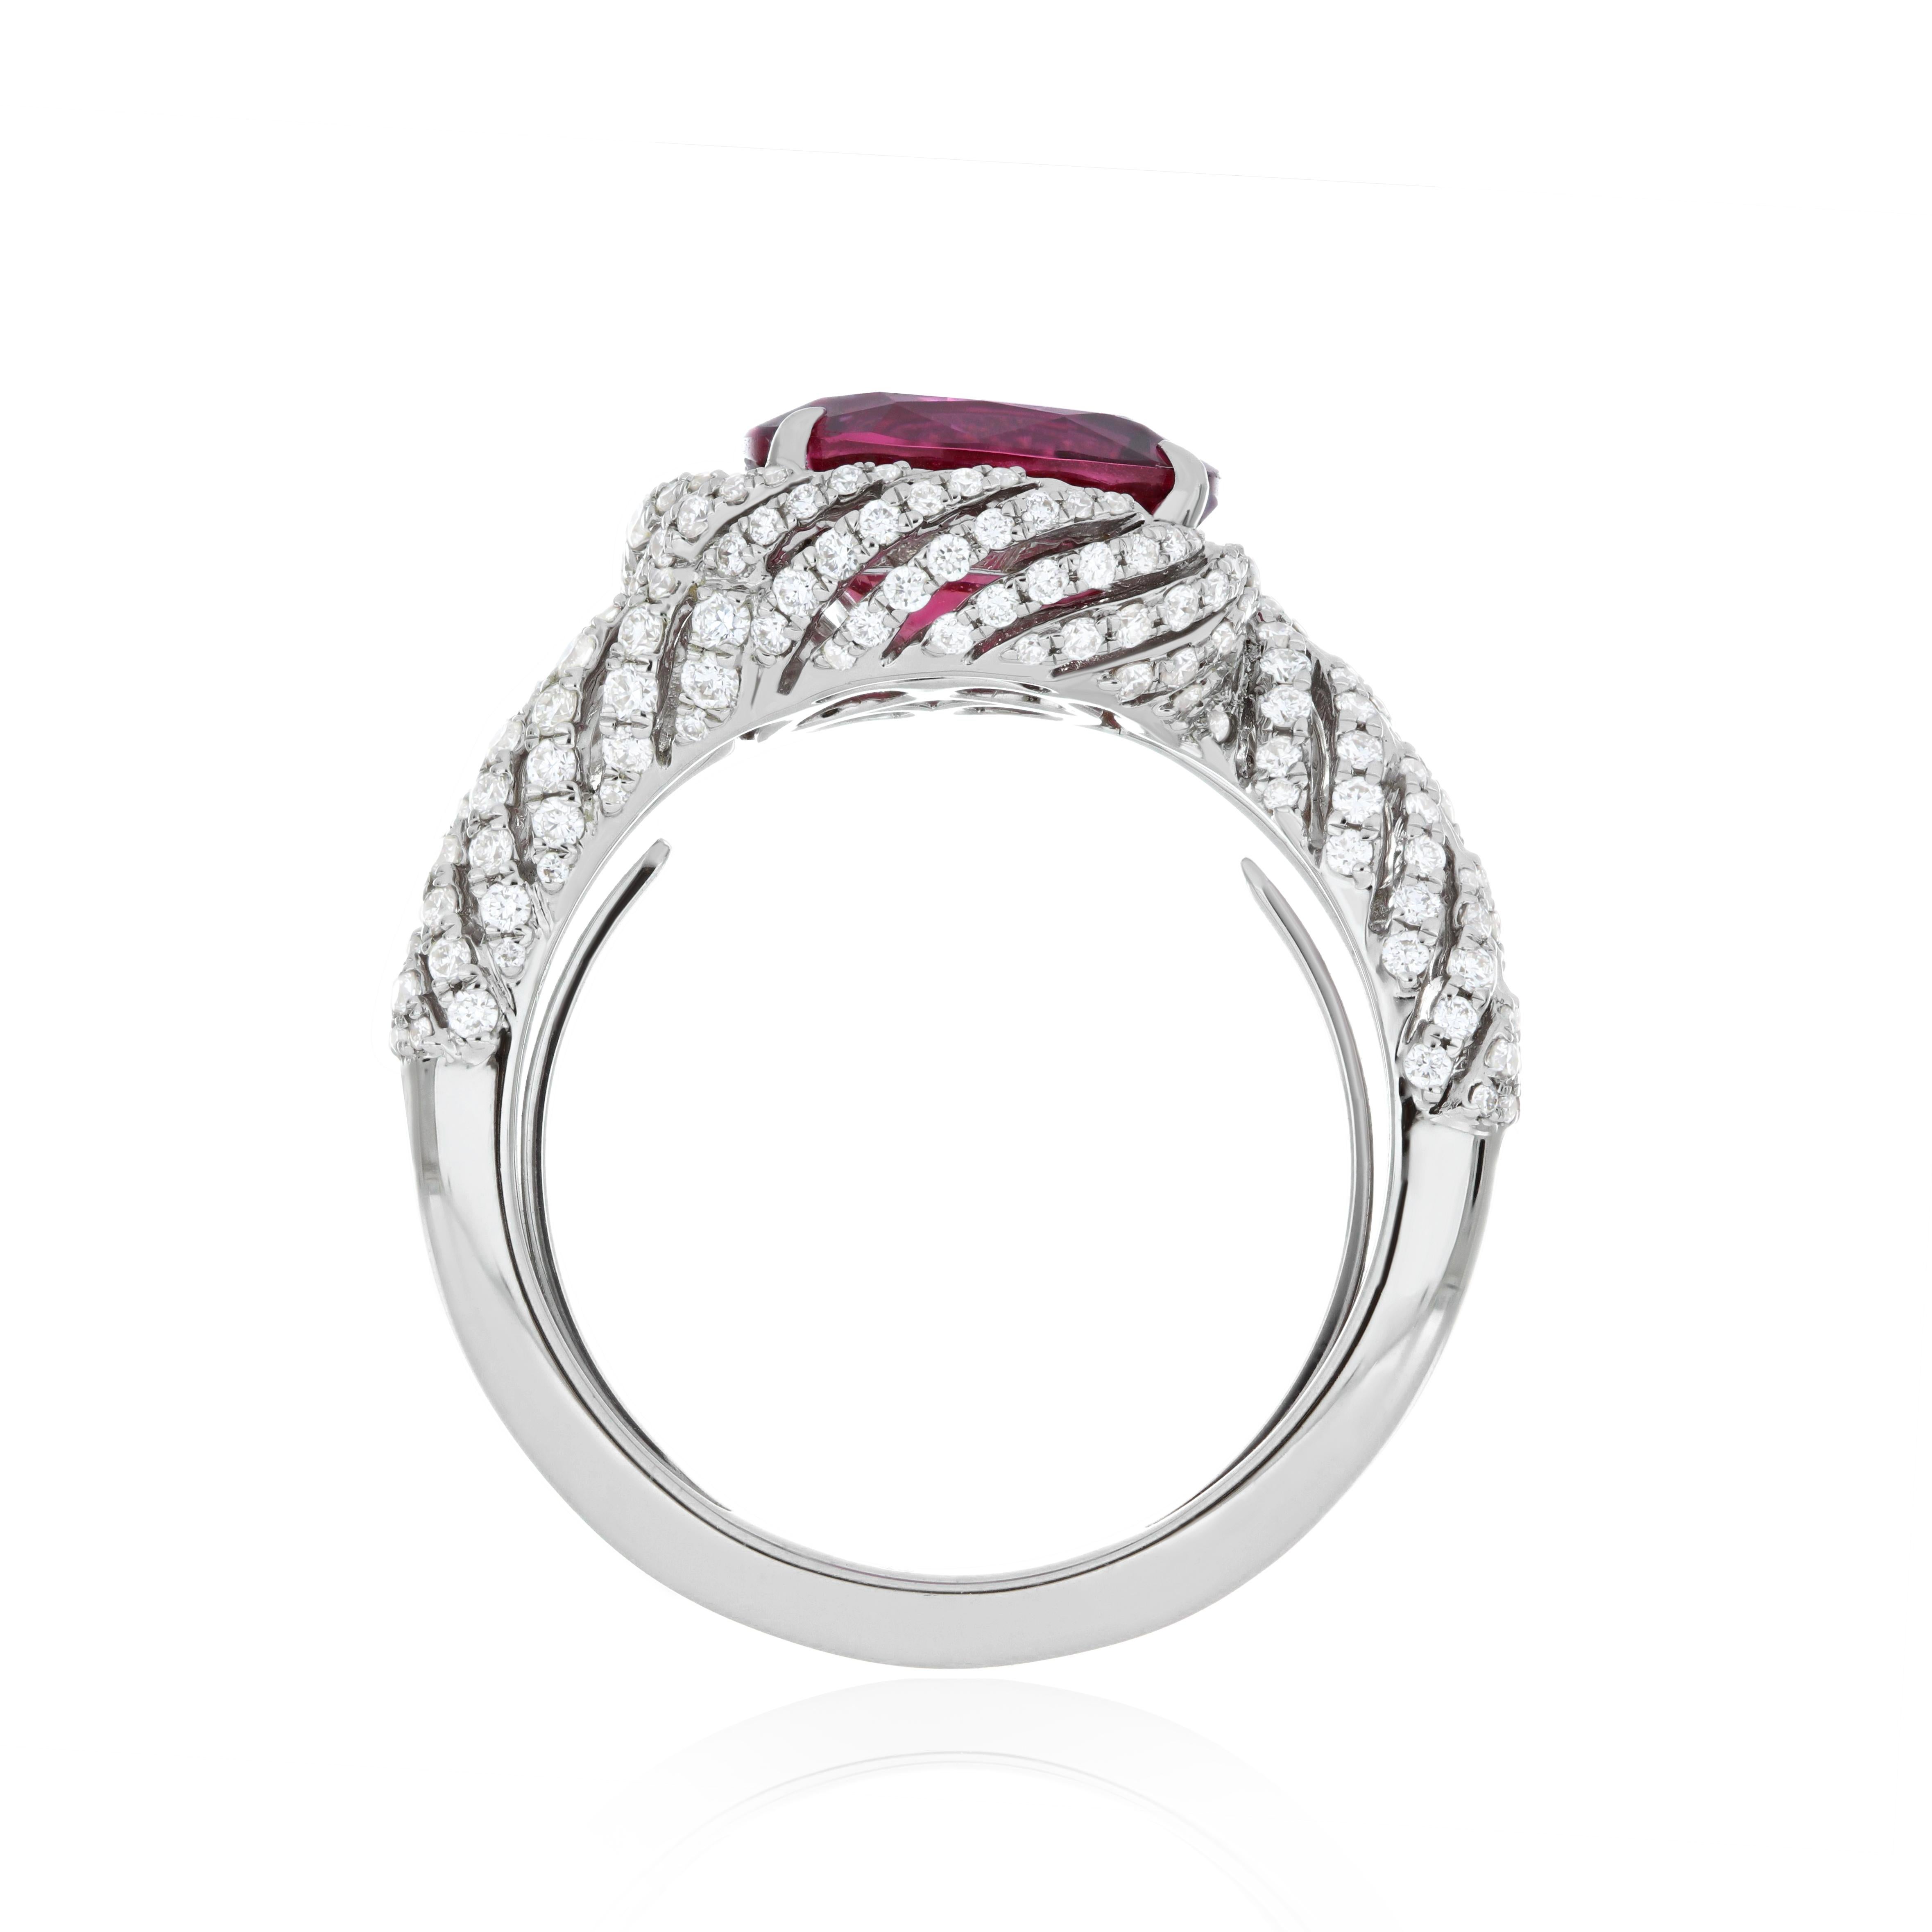 3.2 Carat Rubellite and Diamond Studded Ring in 18K White Gold Ring For Sale 1